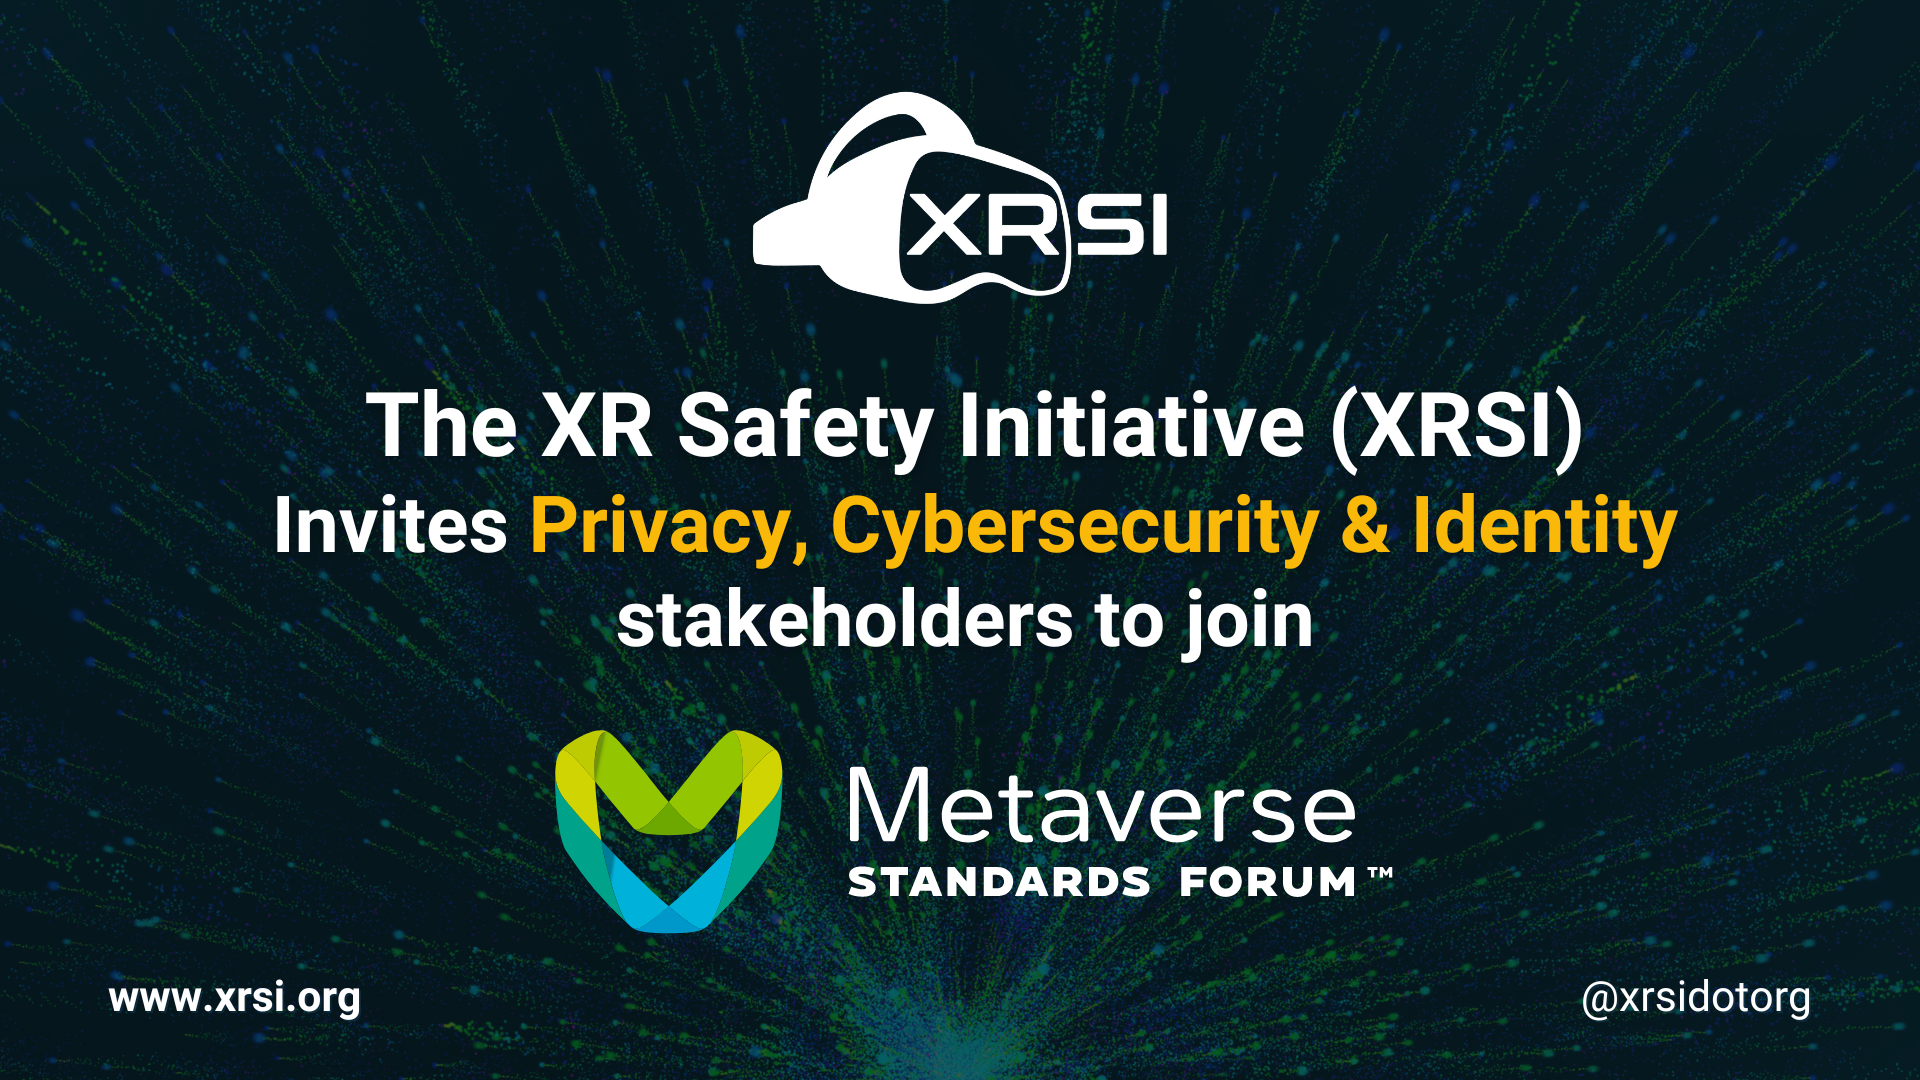 XRSI’s Ongoing Collaboration with Metaverse Standards Forum Reinforces Focus on Privacy, Cybersecurity & Identity